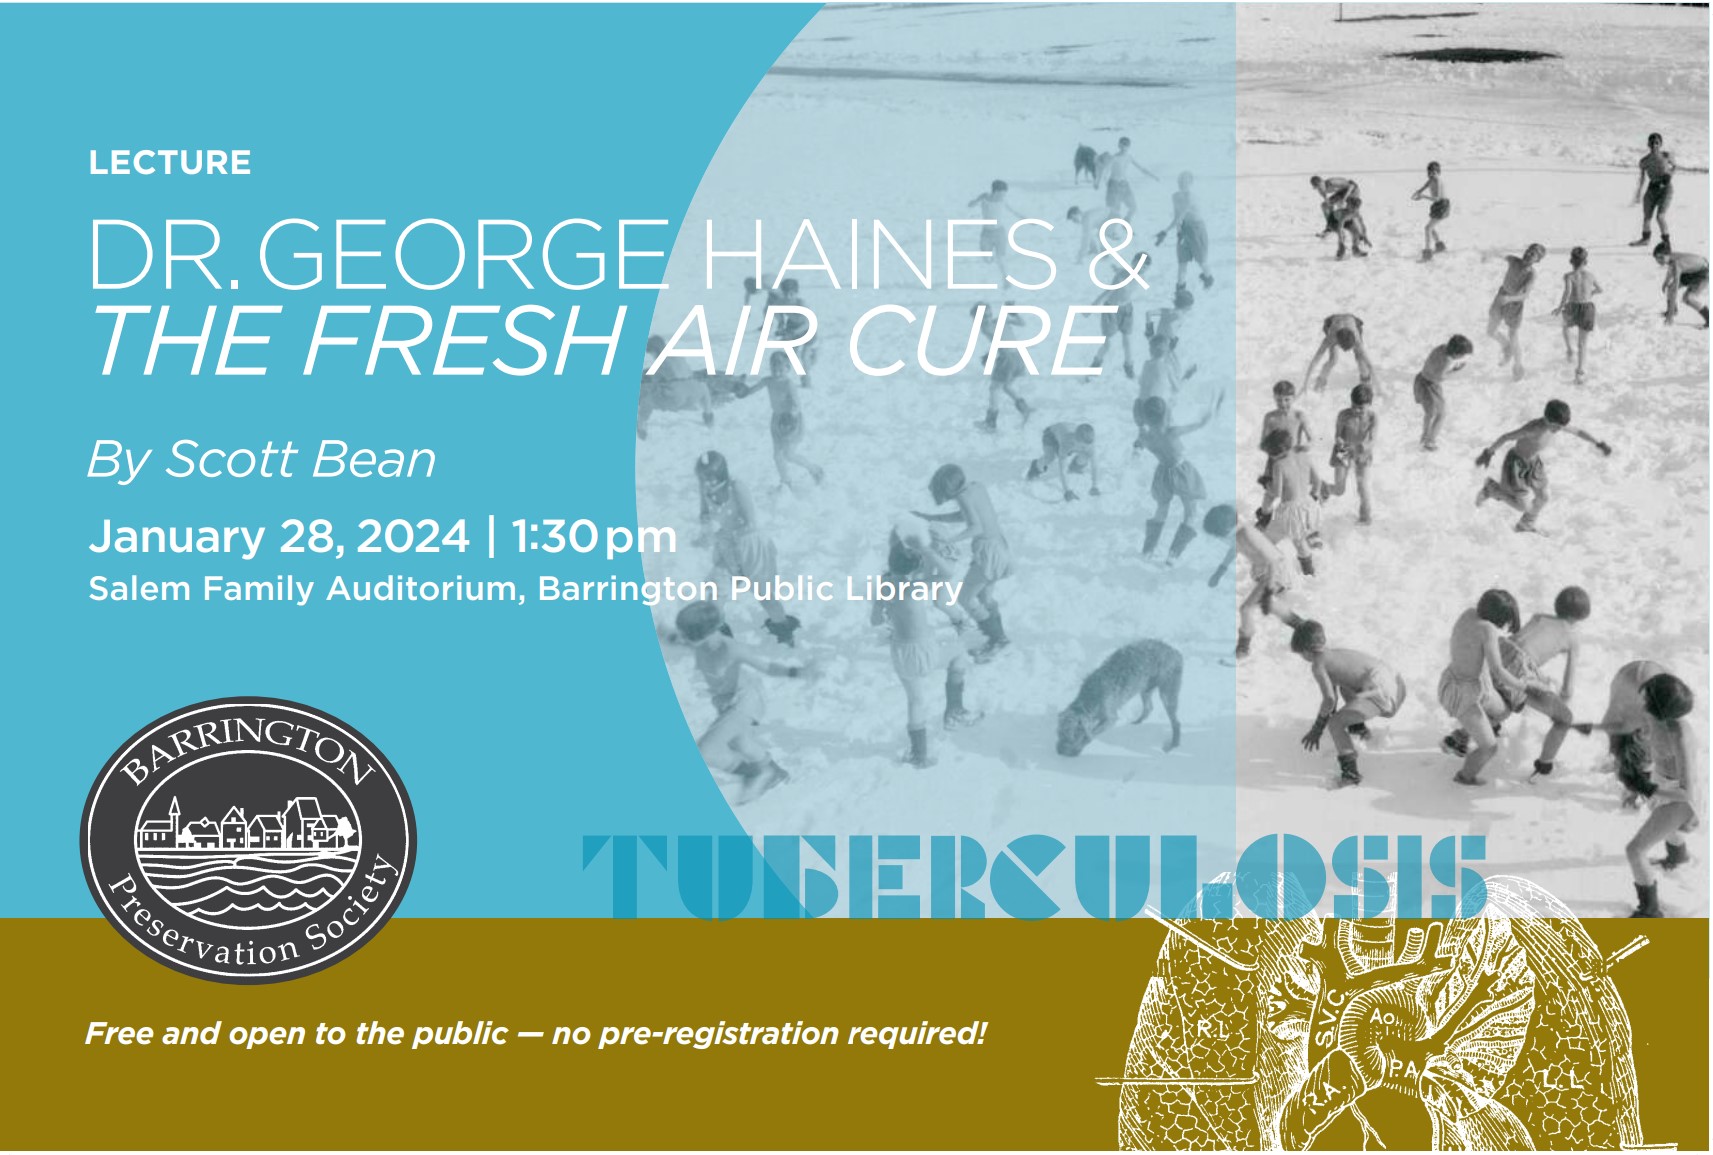 Lecture & Annual Meeting: Dr. George Haines & The Fresh Air Cure ...